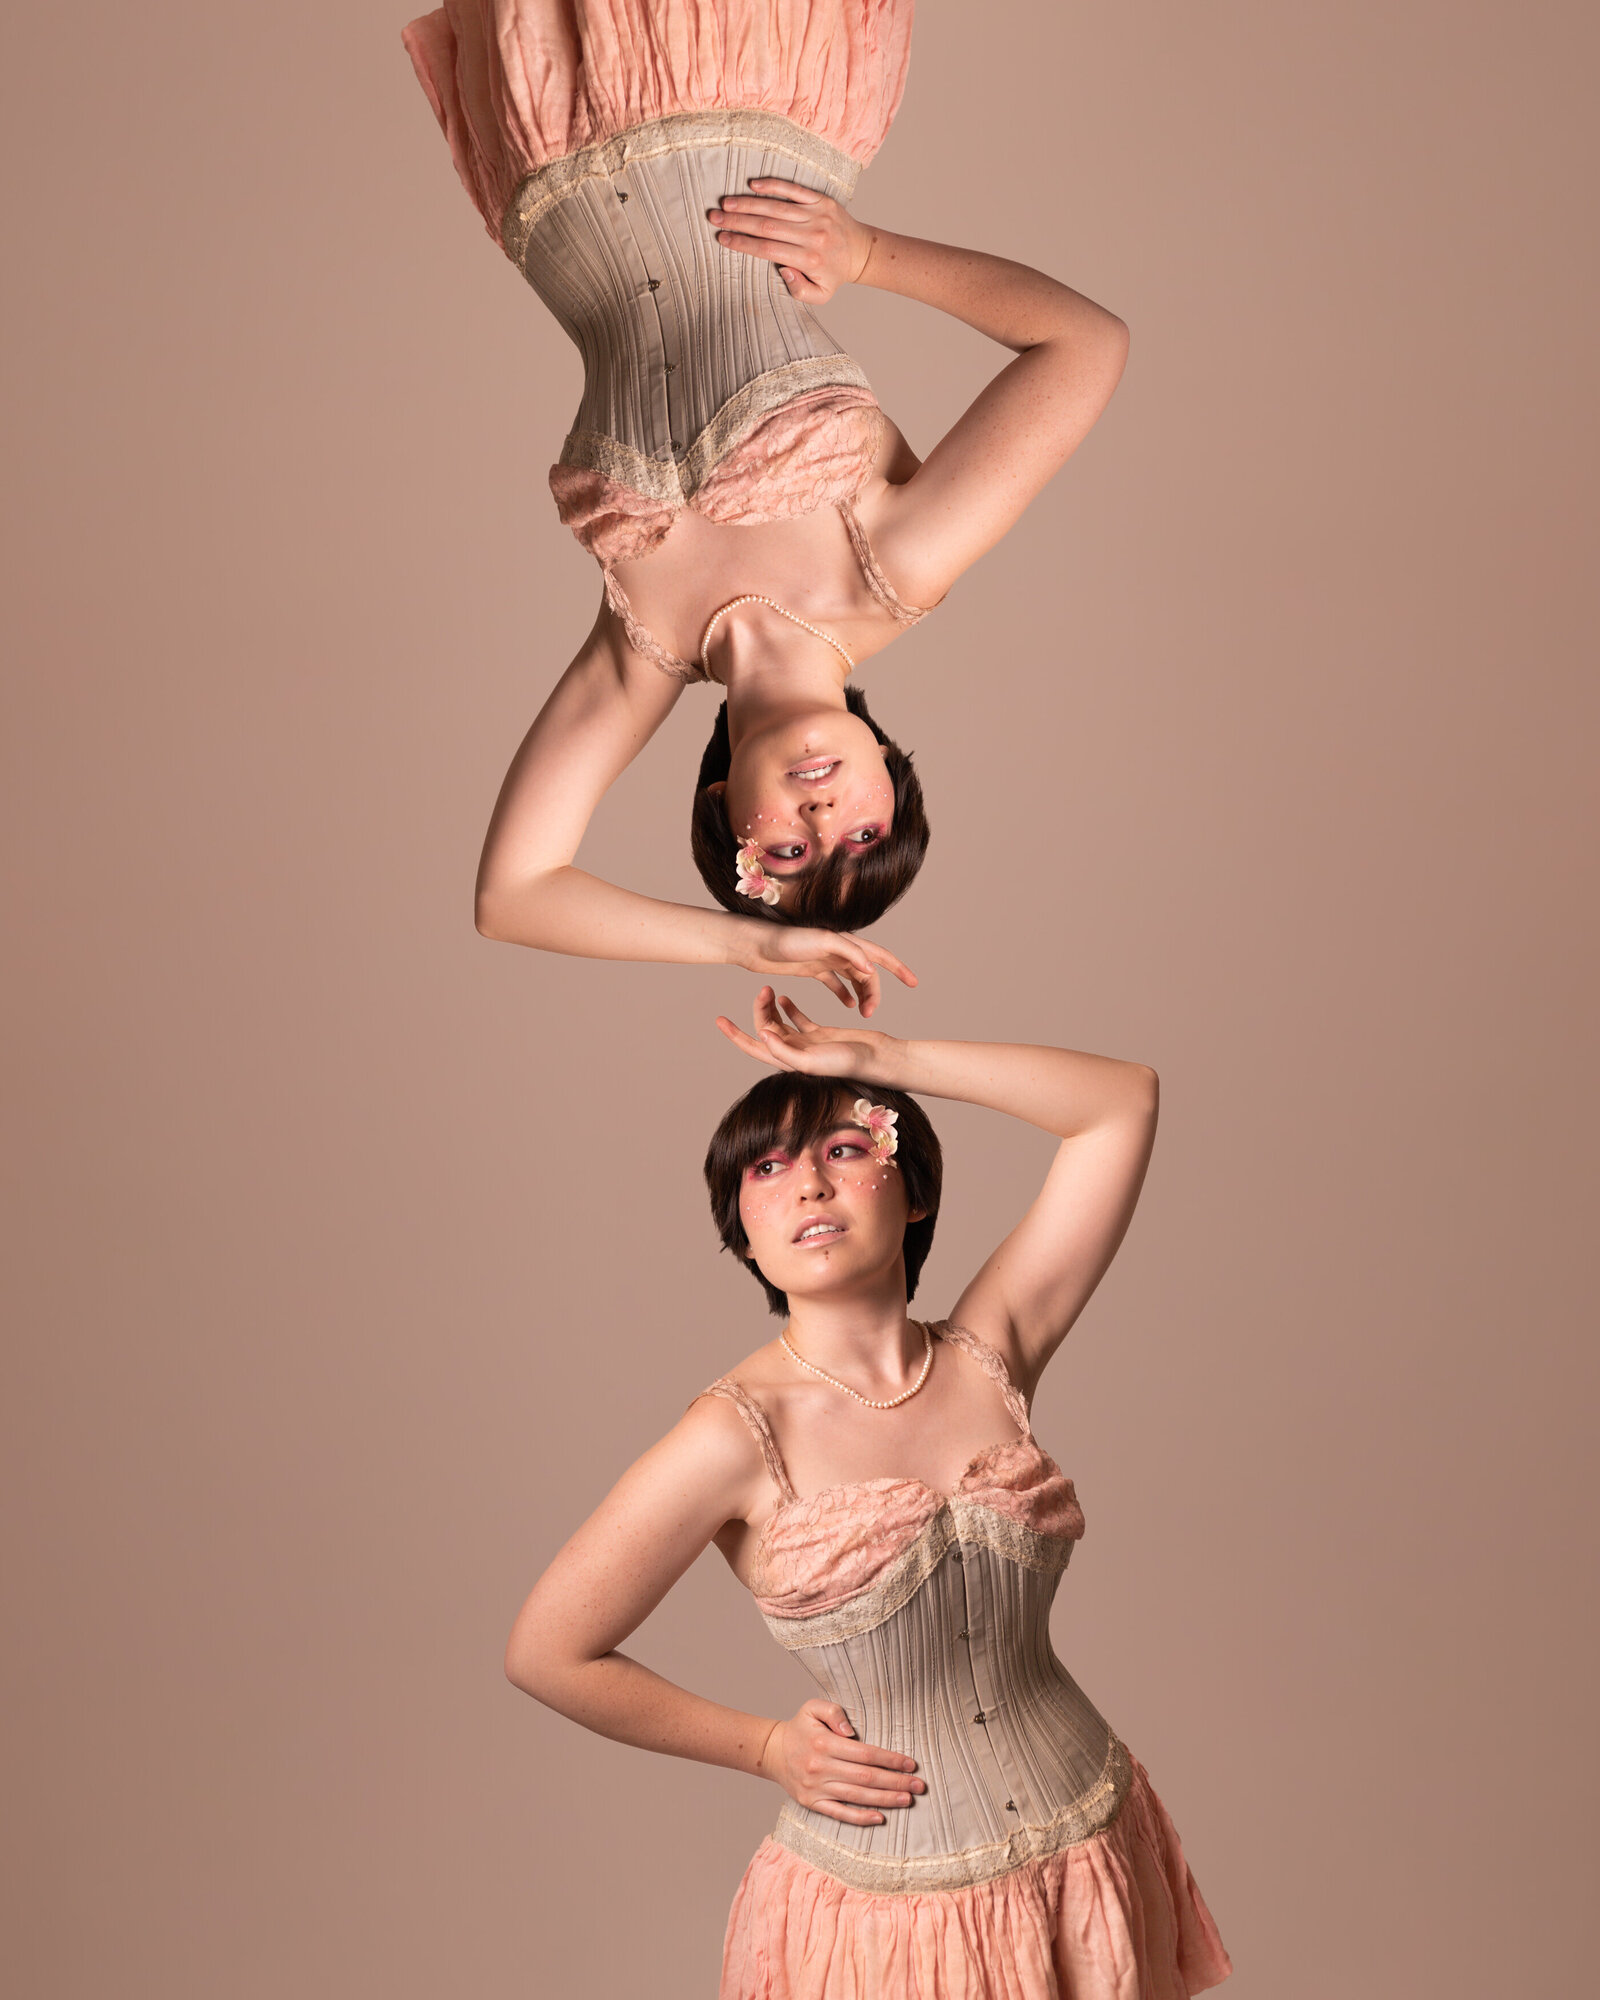 Image of a person with one hand on their hip and the other over their head with the same image reflected above them